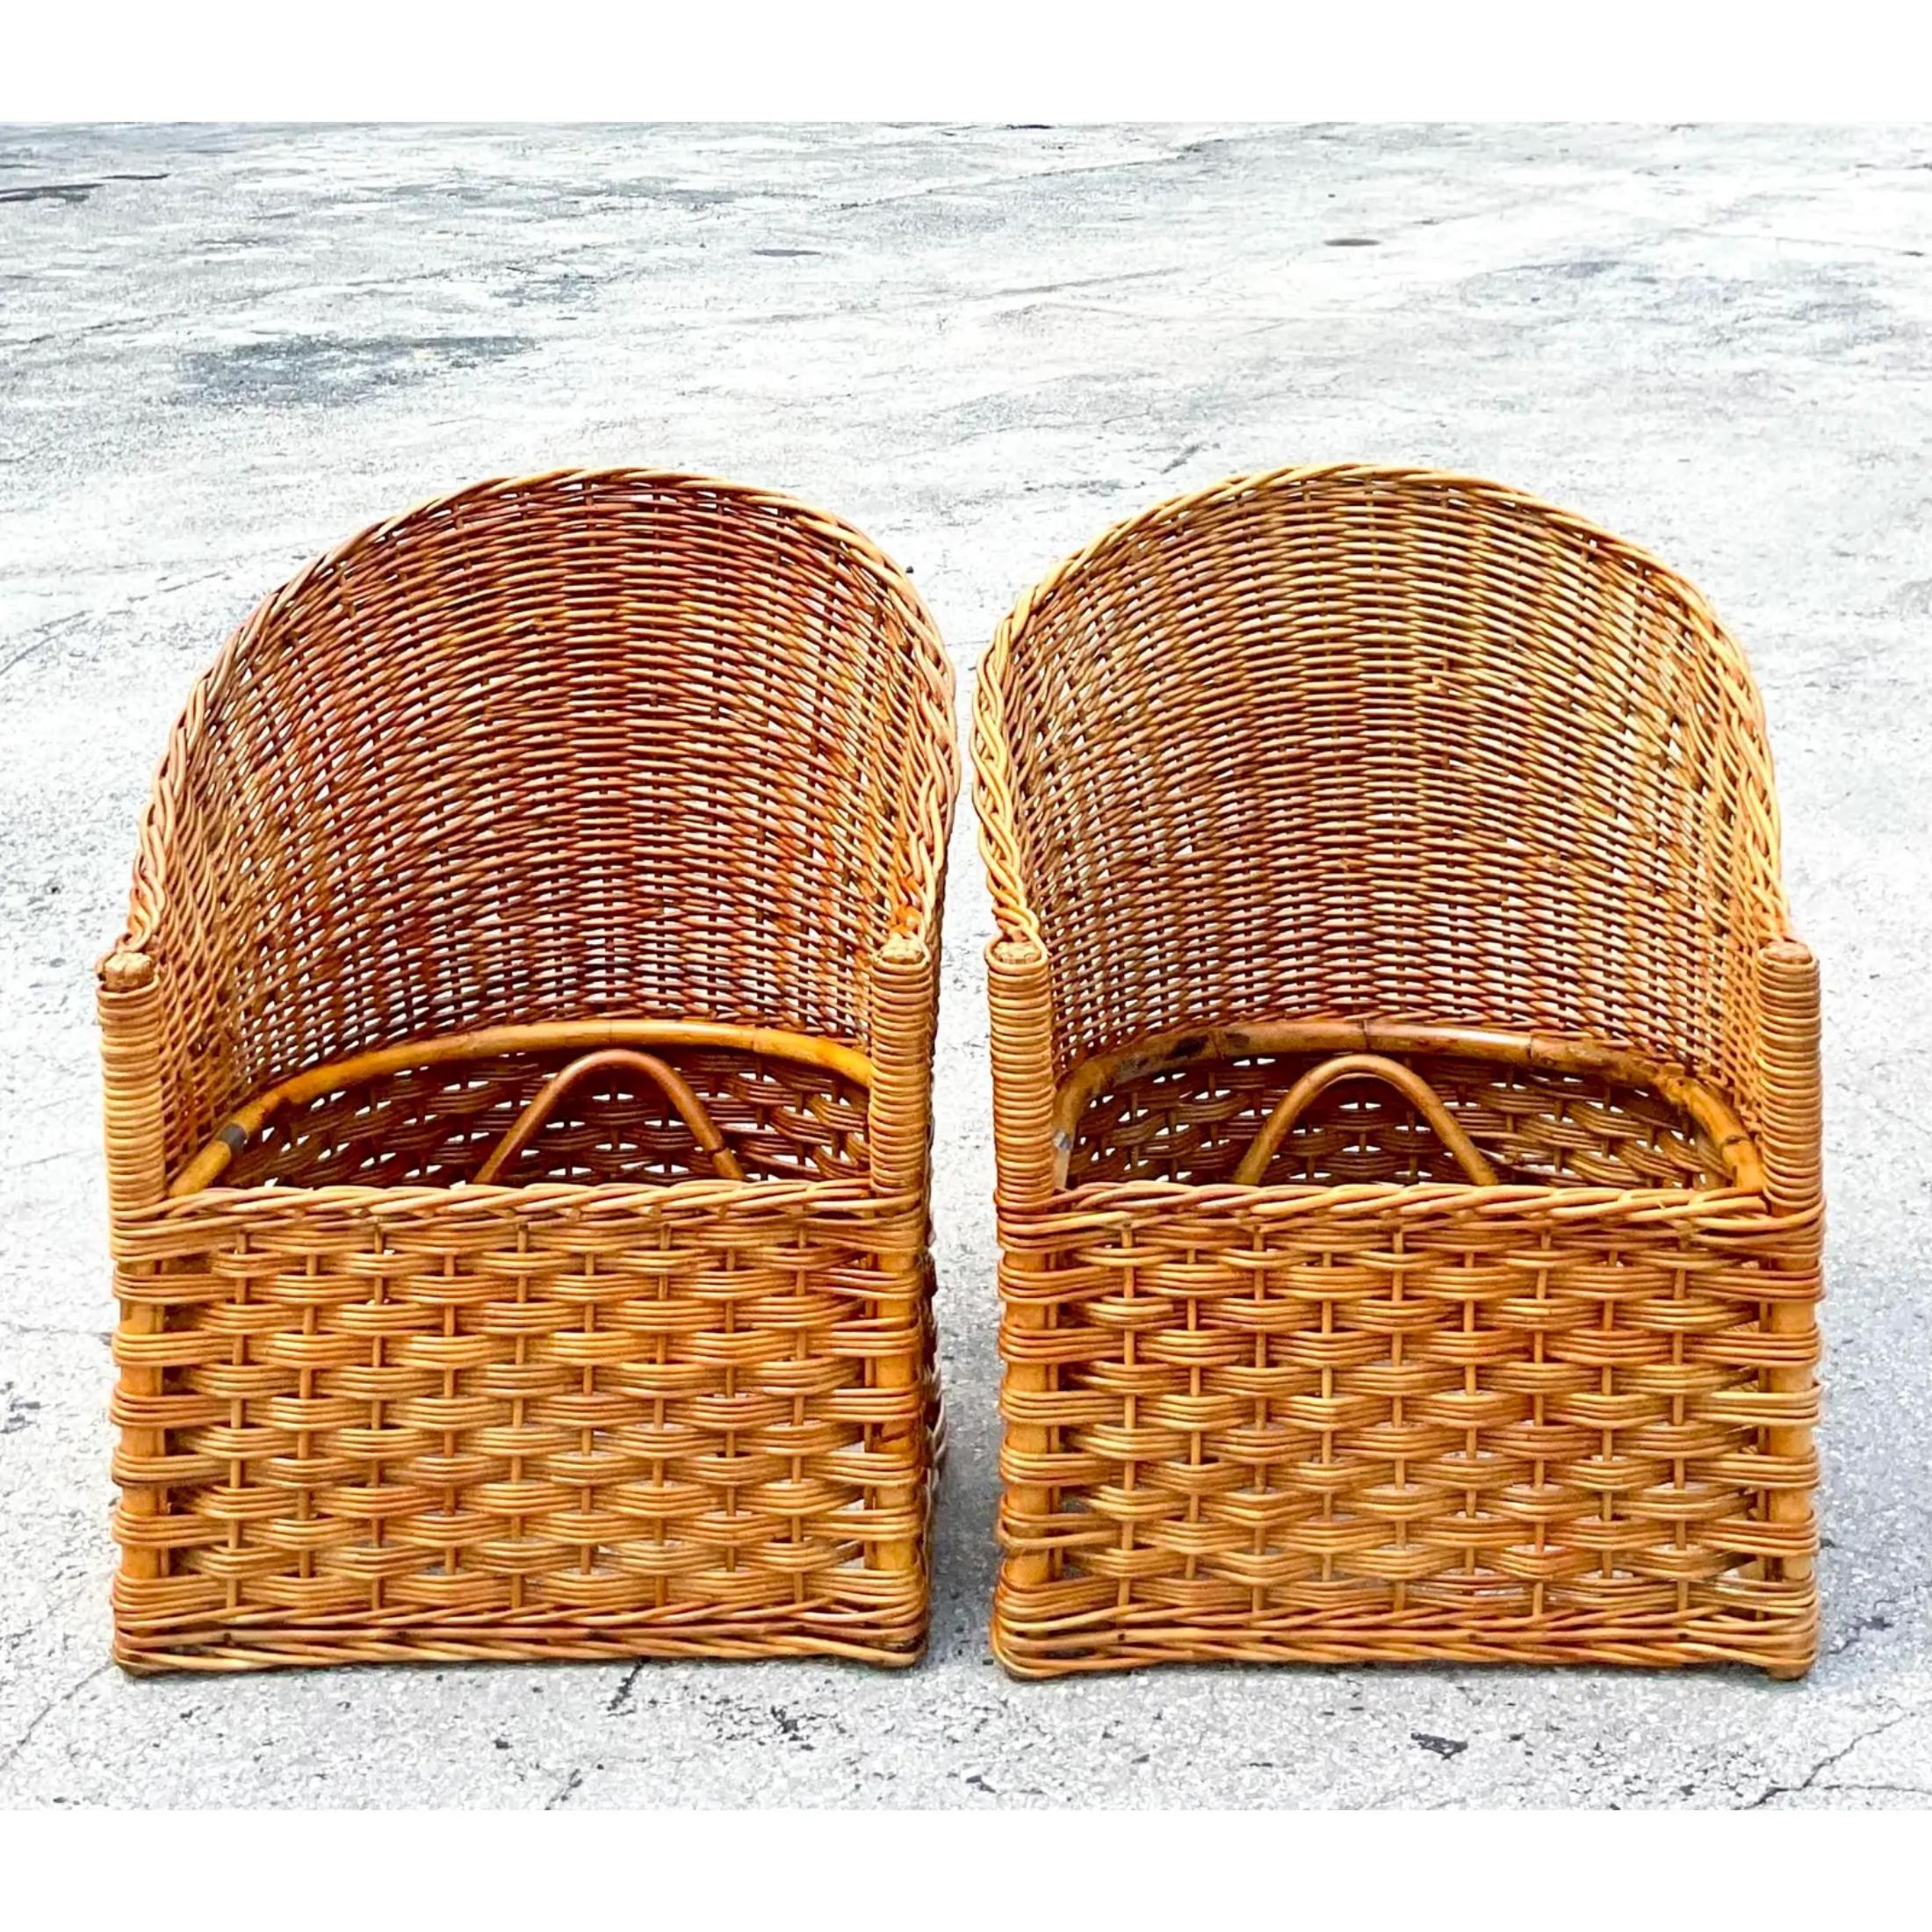 Late 20th Century Vintage Coastal Italian Wicker Works Tub Chairs - a Pair For Sale